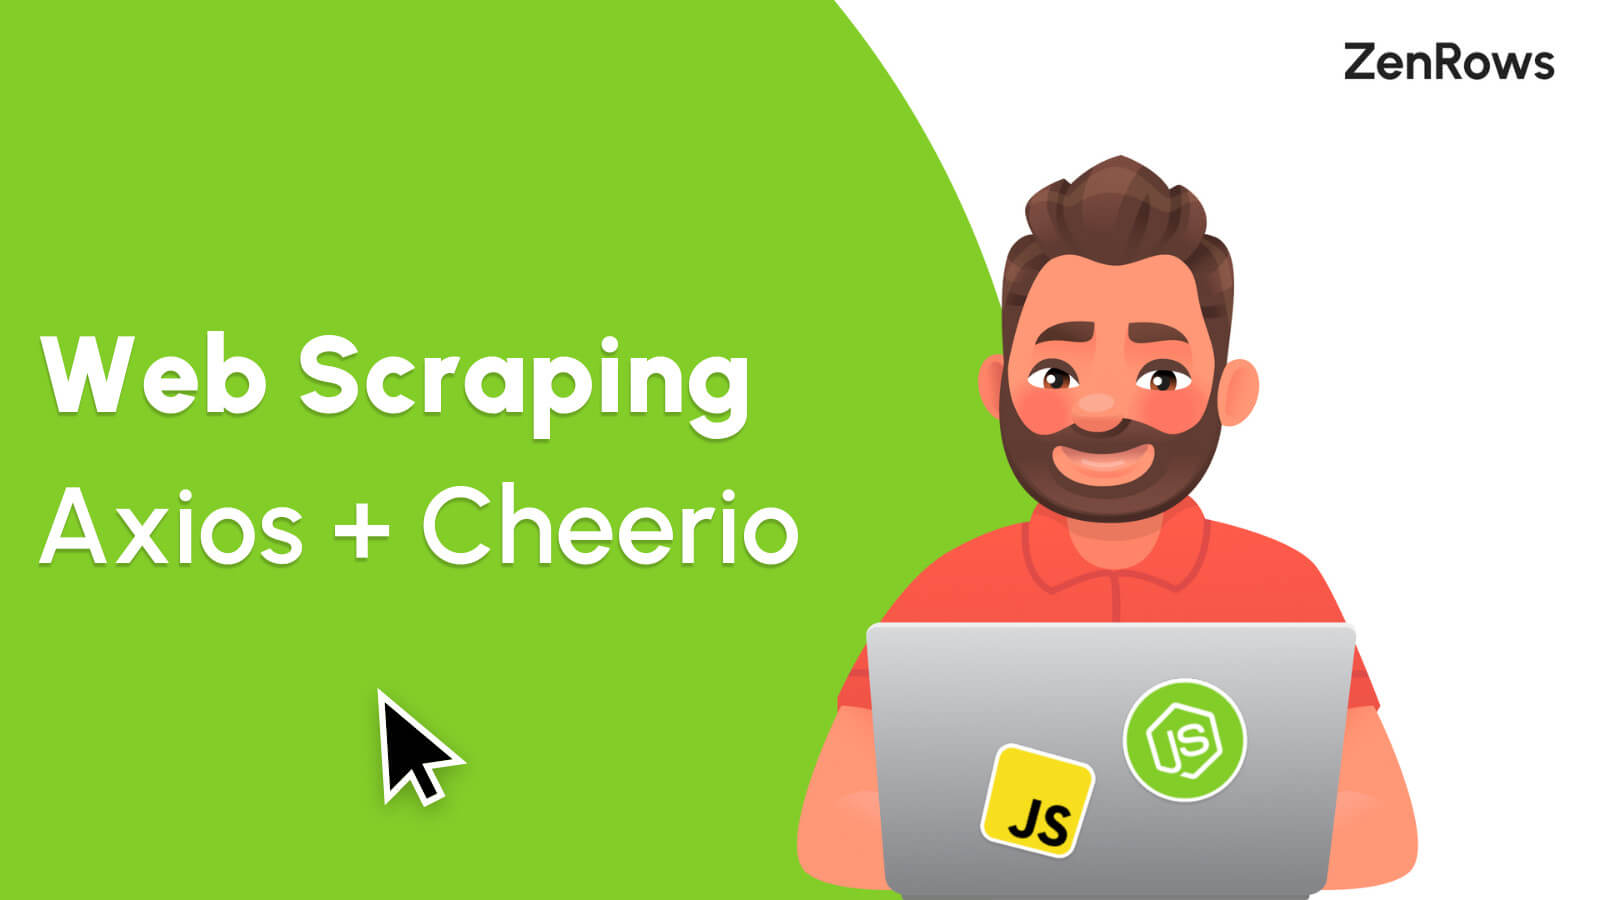 Web scraping with Axios and Cheerio